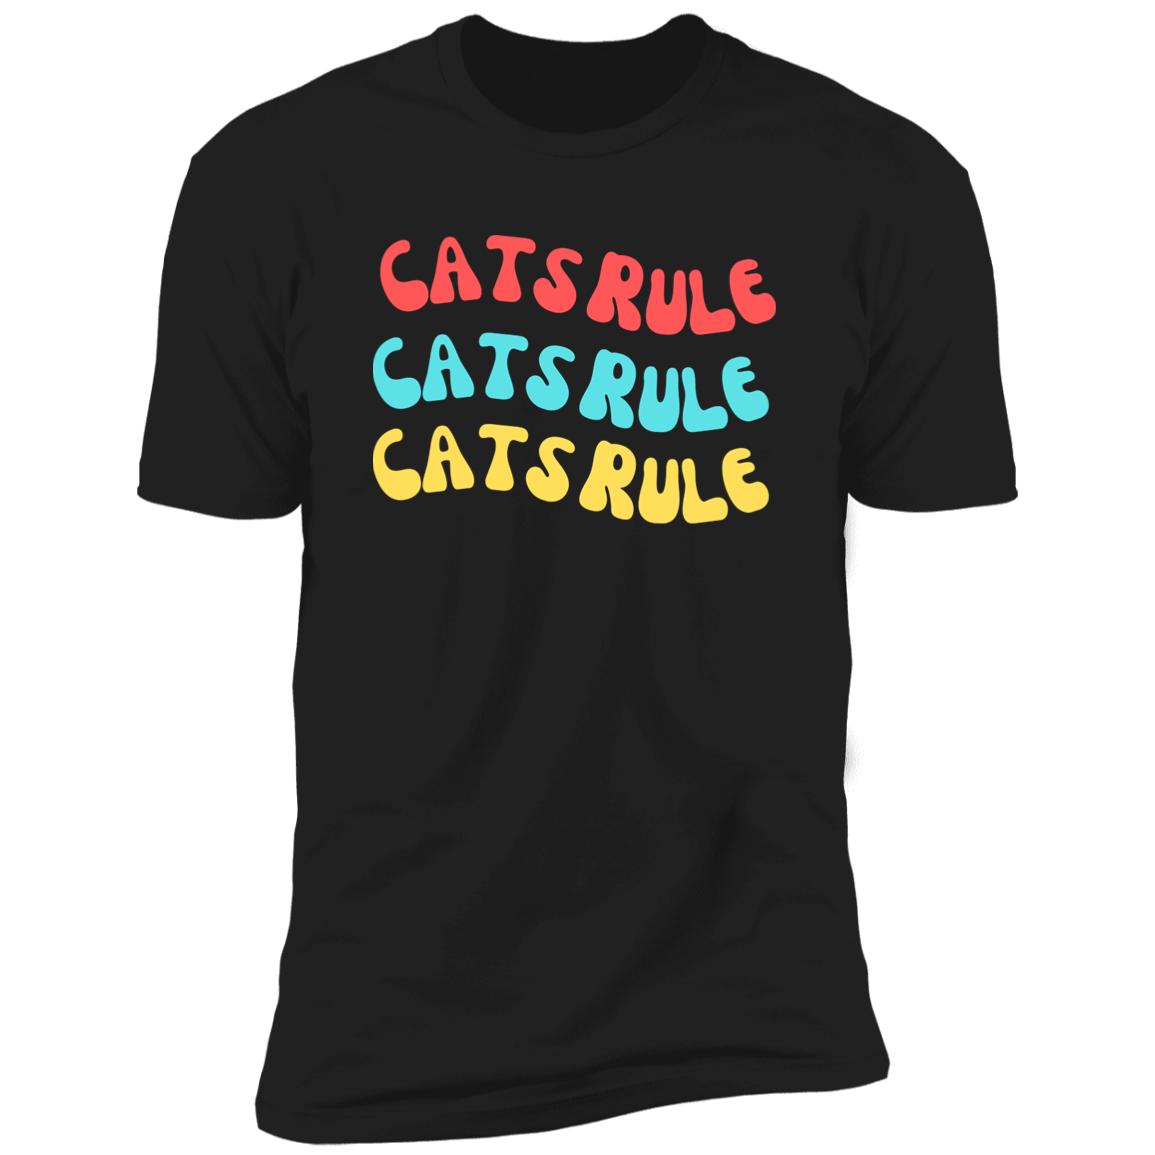 Cats Rule T-shirt, Cat Shirt for humans, in black 